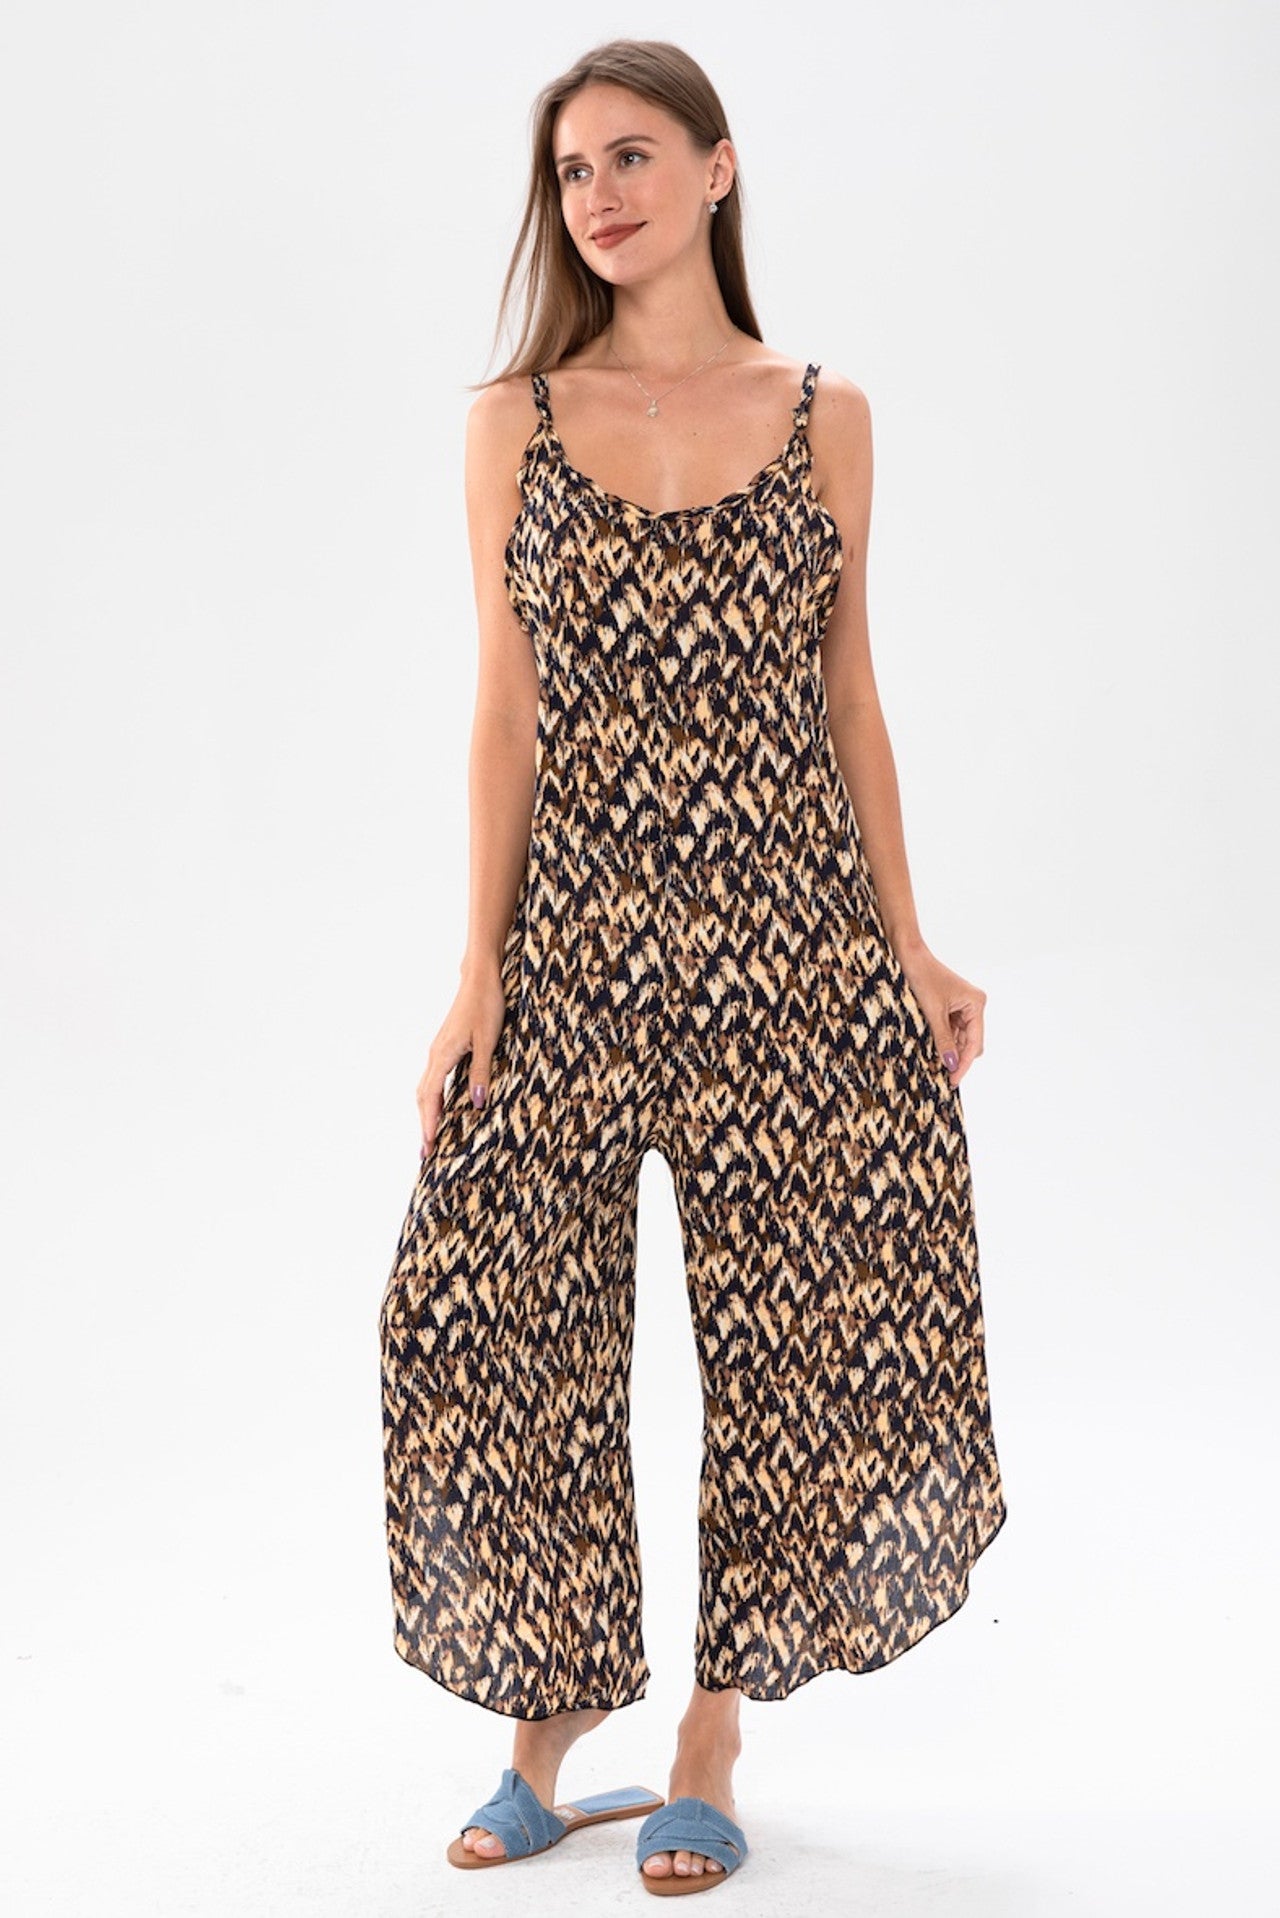 Call of the Wild Brown Jumpsuit